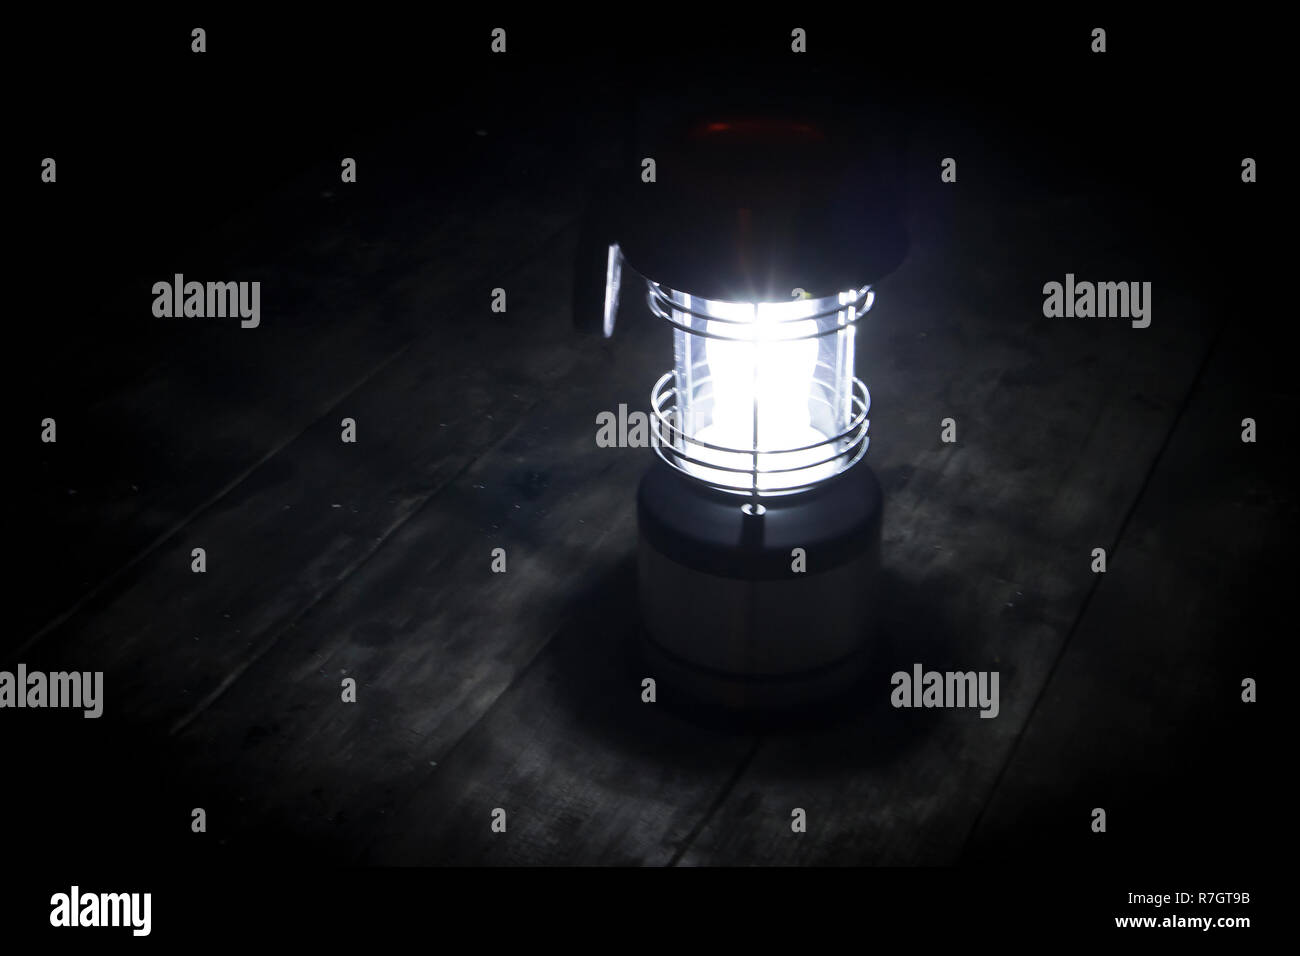 Grunge photo of lighted wireless lantern standing in the night on a wooden surface Stock Photo